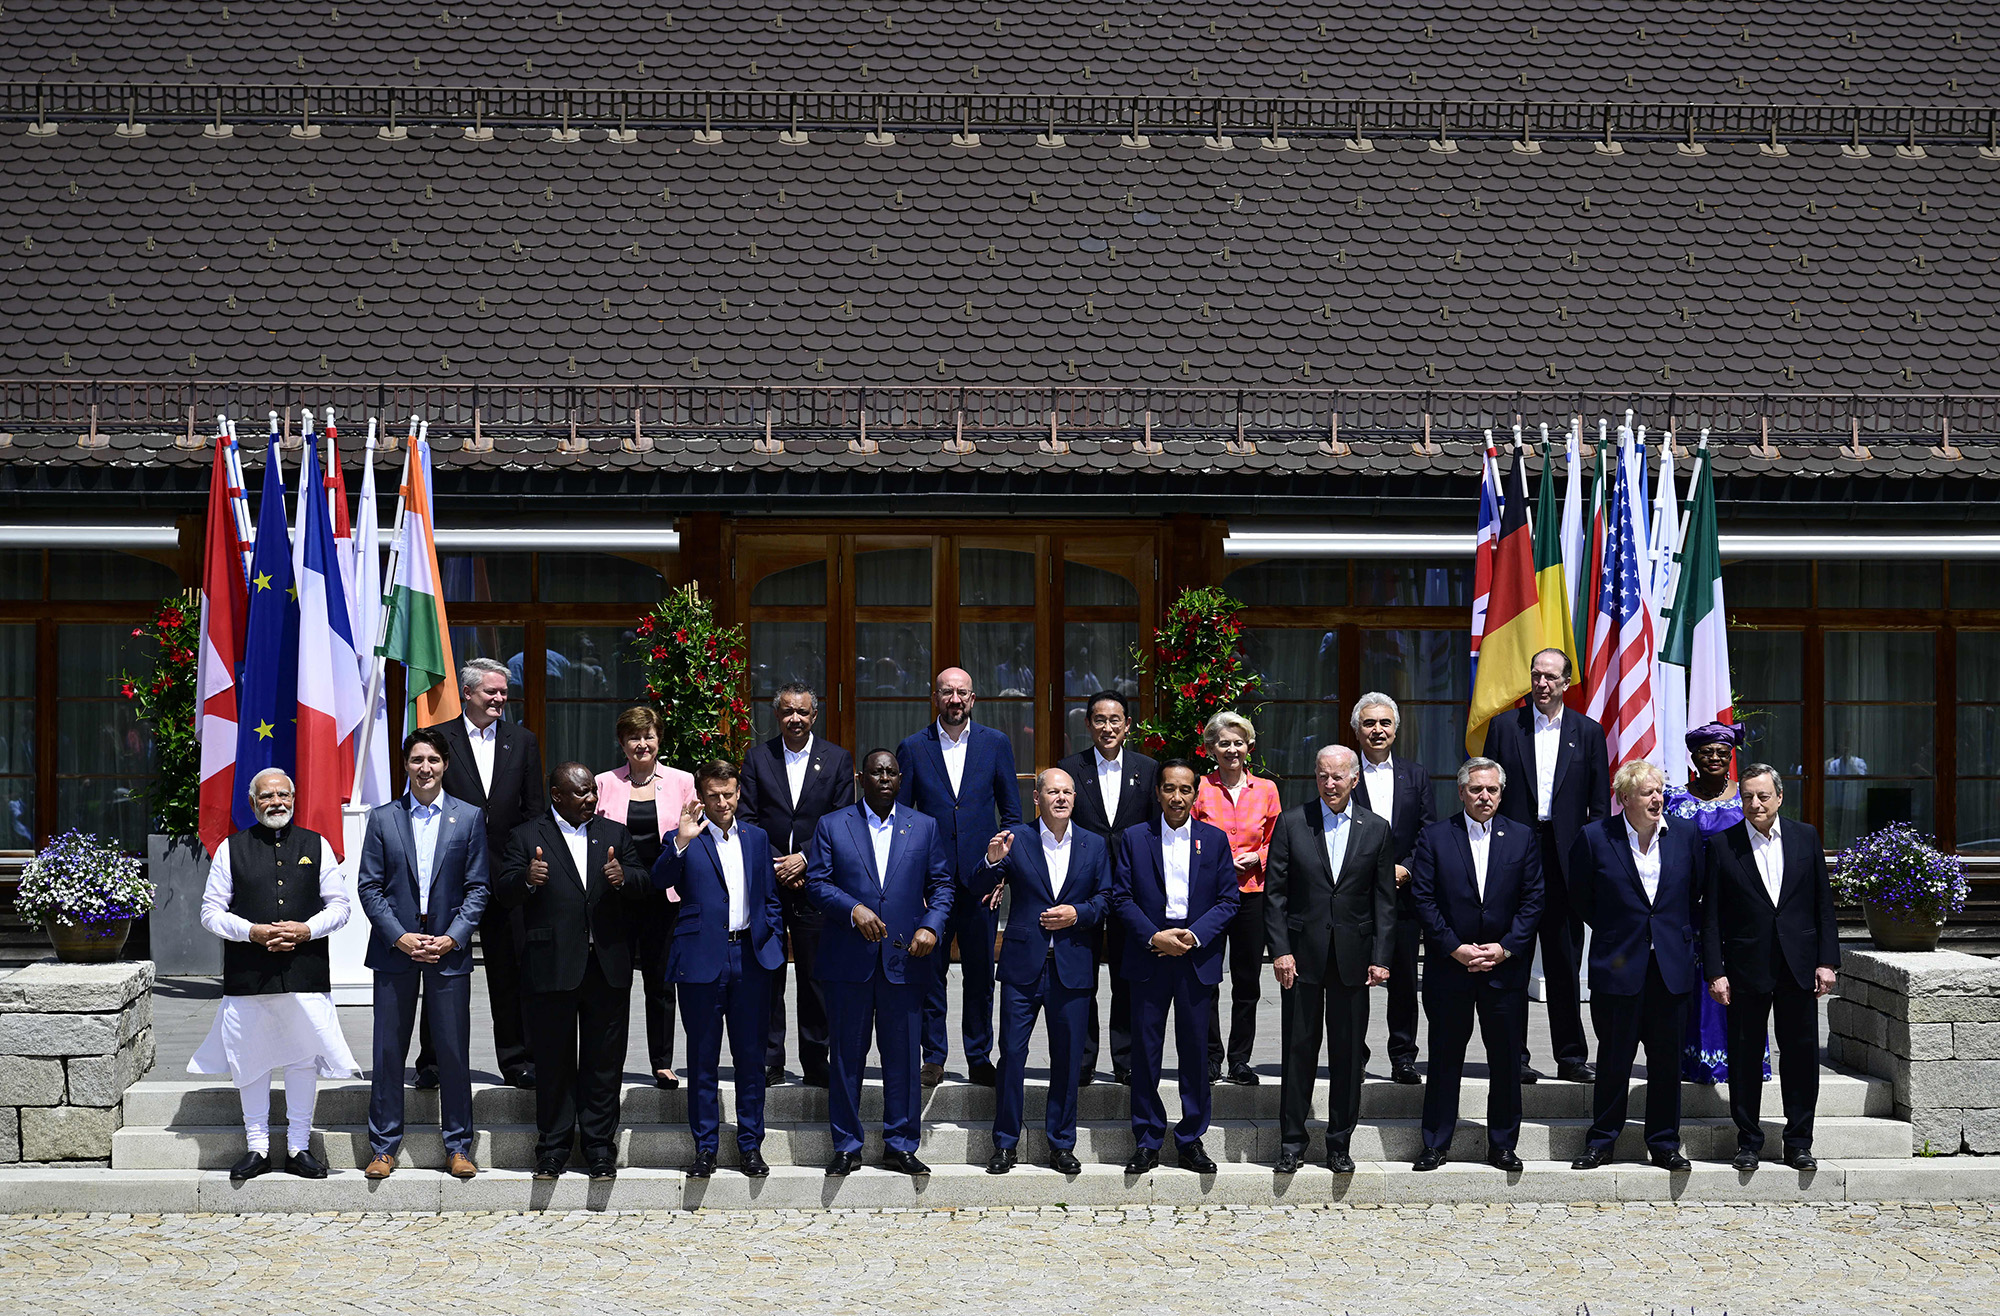 G7-leaders and participants of the outreach program pose for a family photo on June 27, at Elmau Castle, Germany